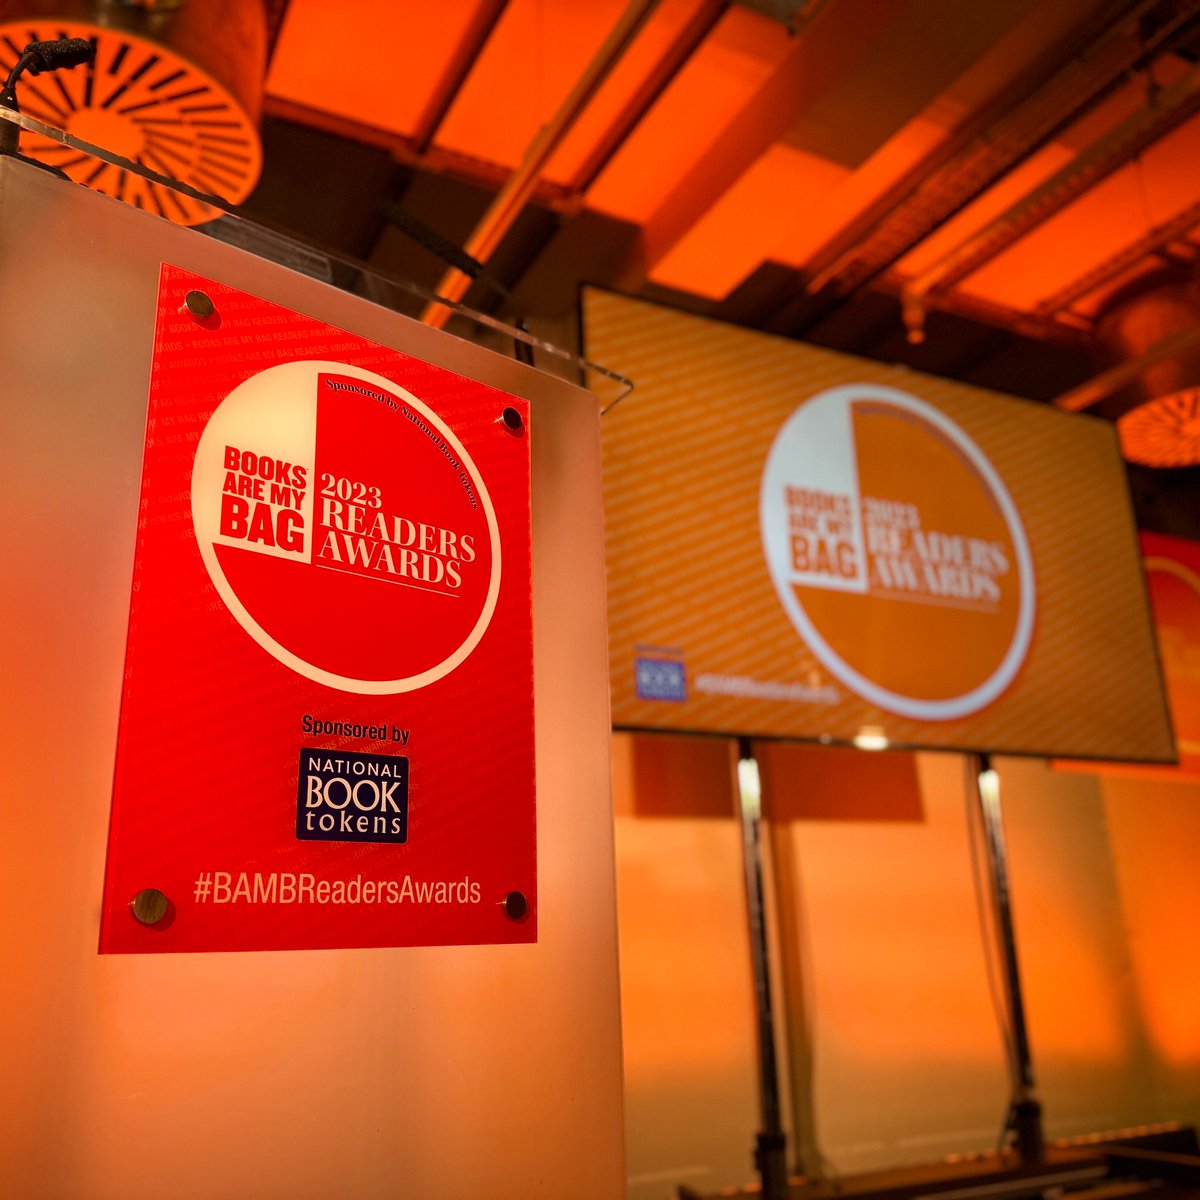 The team had a welcome return to @Foyles flagship location in London in recent weeks providing technical services and live streaming for the @booksaremybag Readers Awards.

#Awards #Event #WeMakeEvents #BookAwards #Tech #EventProf